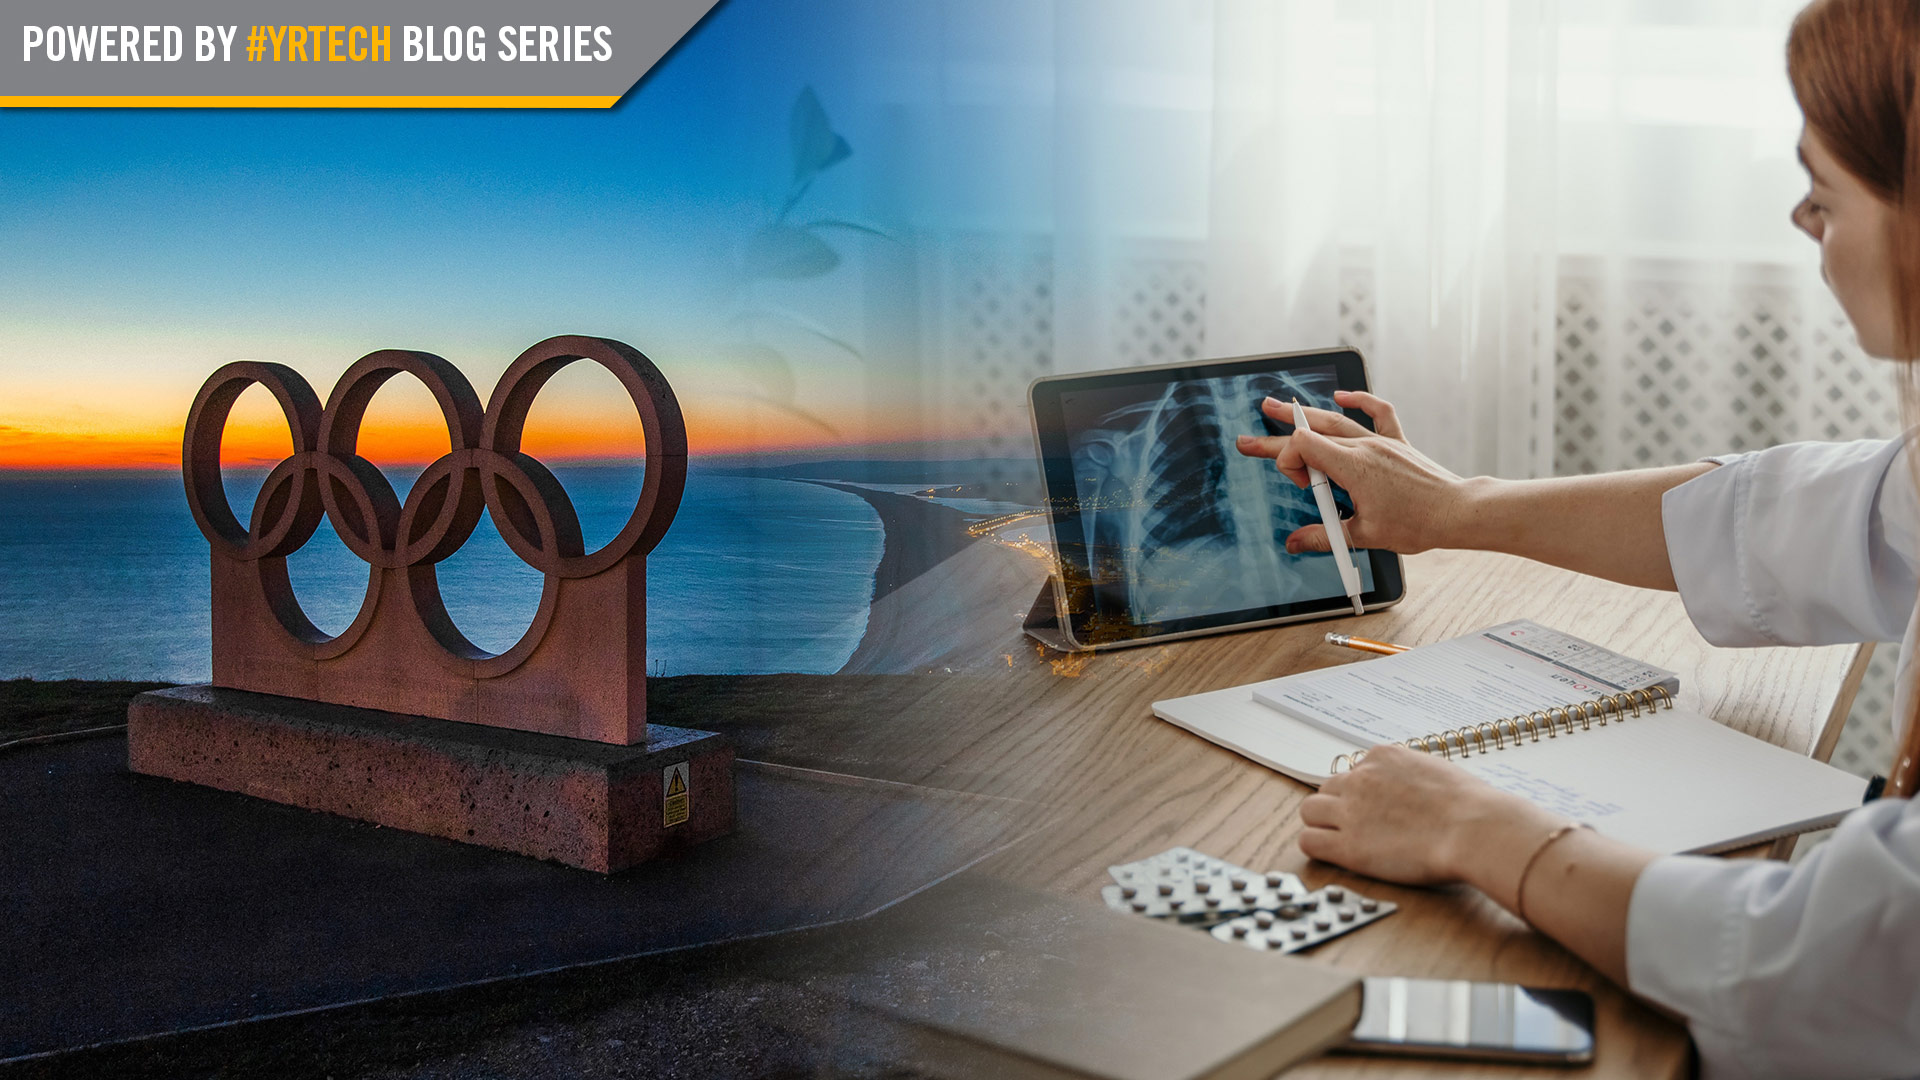 Olympic Rings and Doctor on iPad